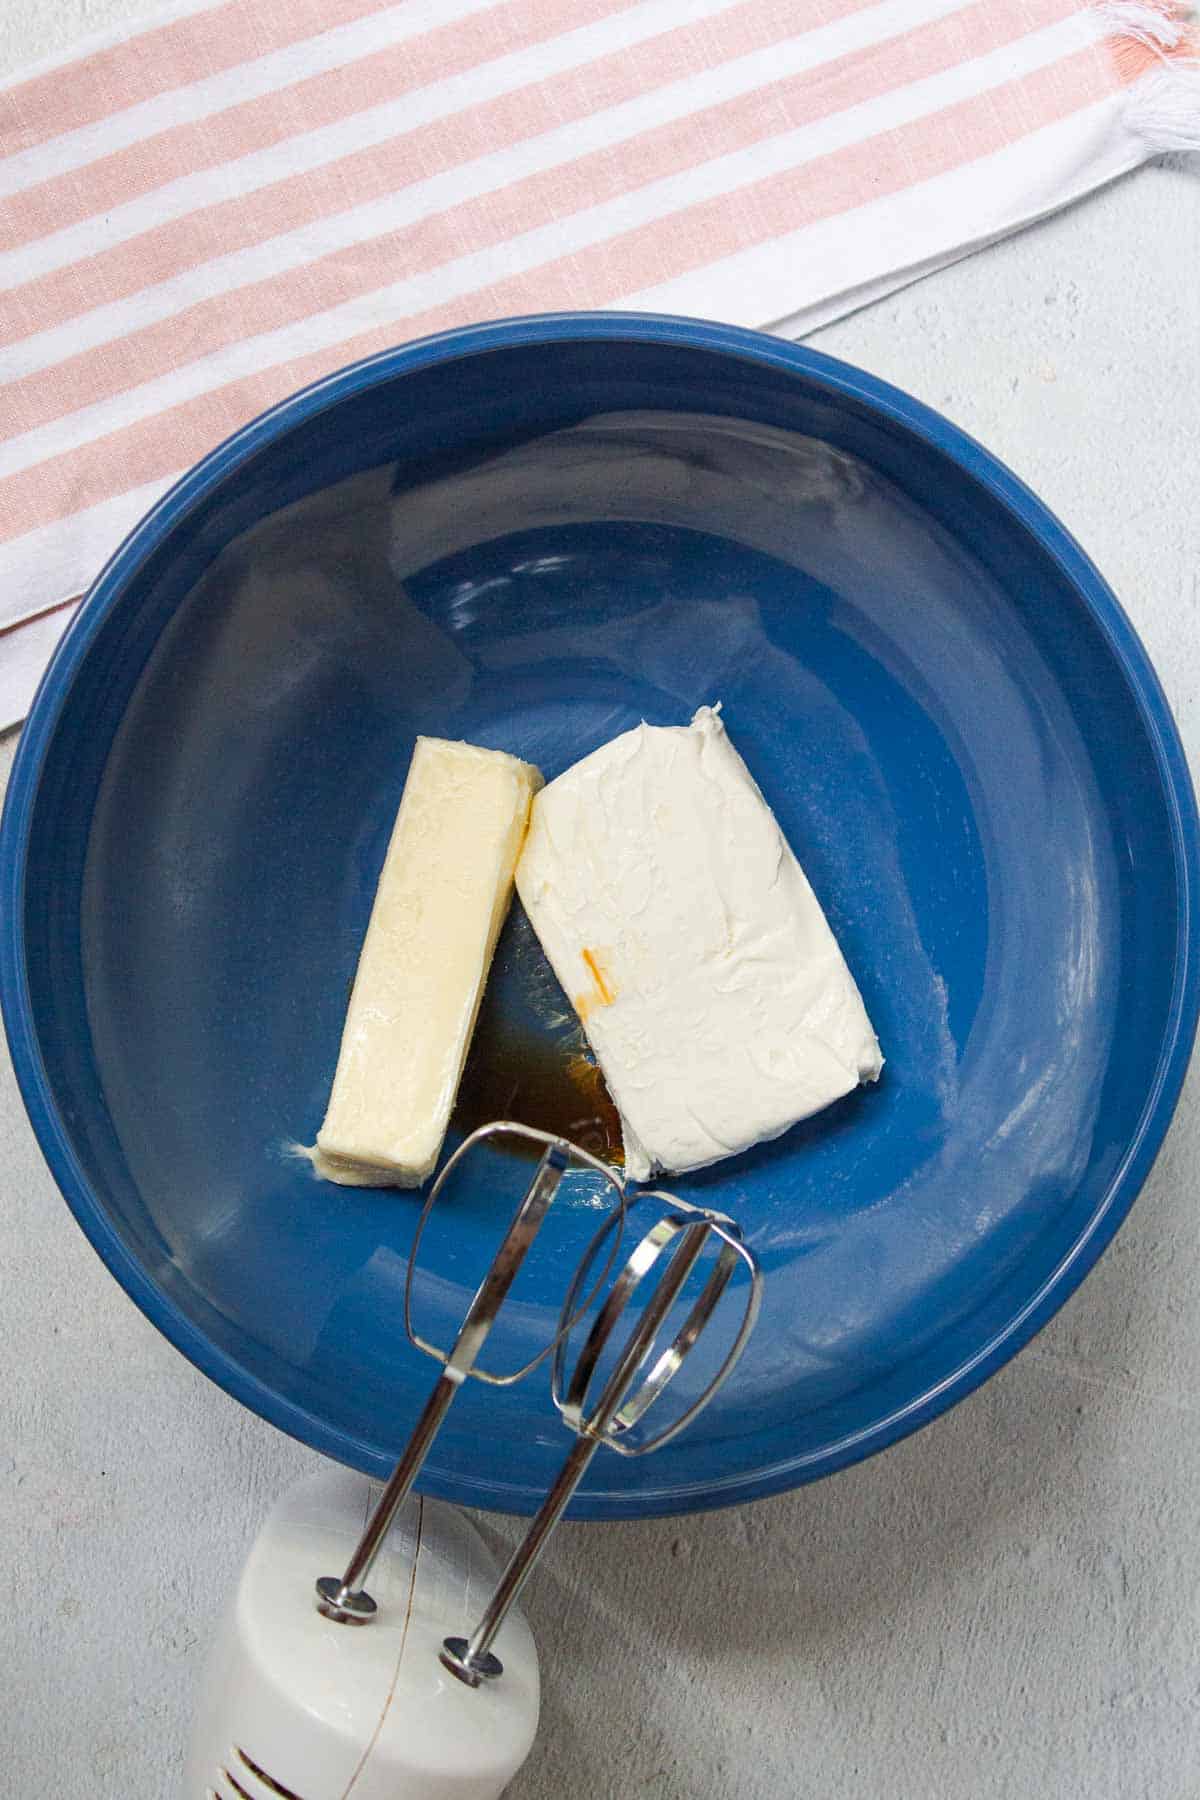 Softened butter, softened cream cheese, and vanilla are added to a large mixing bowl